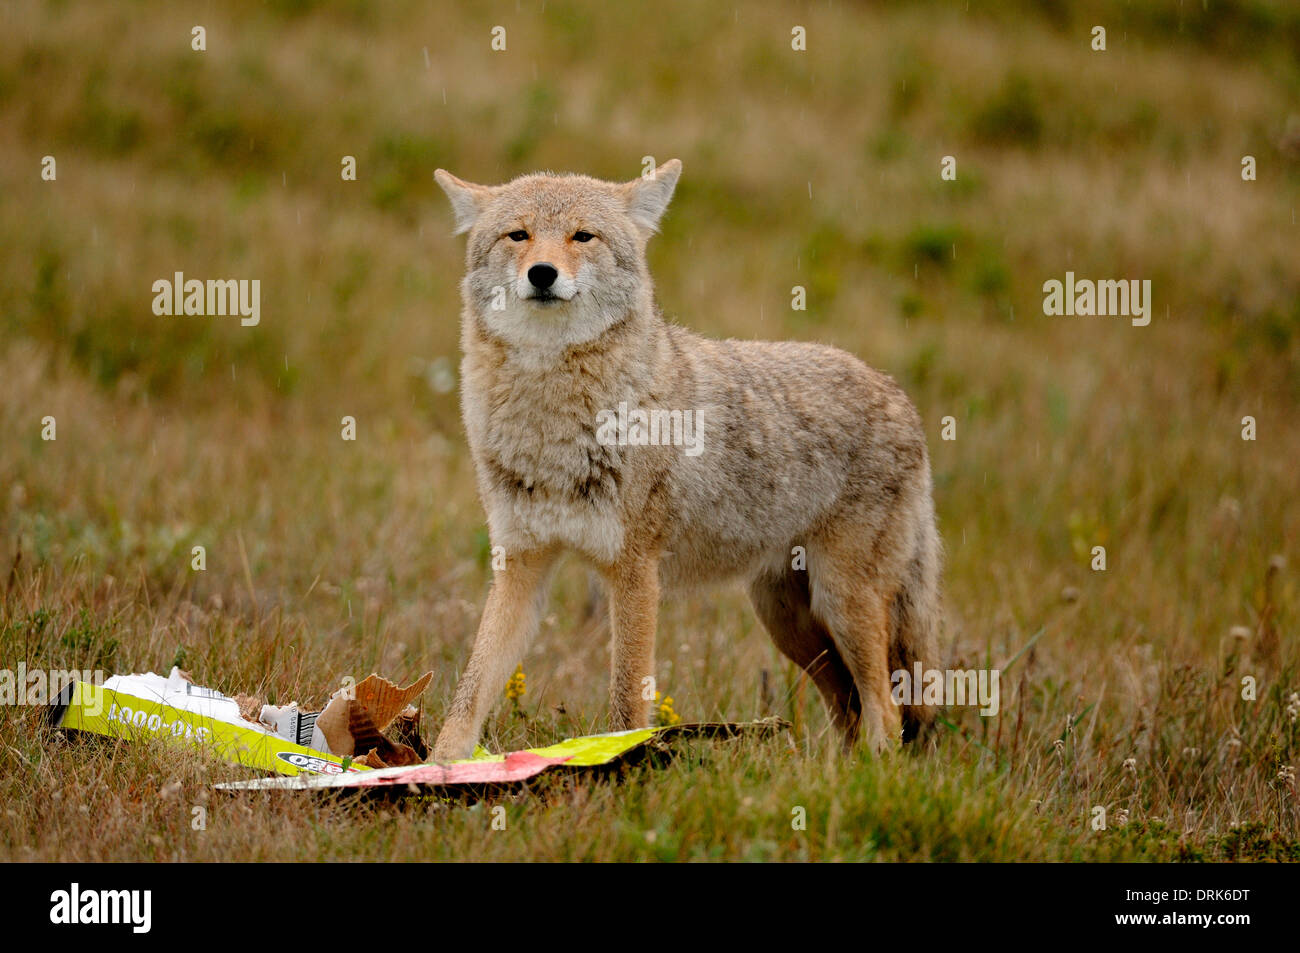 coyote-canis-latrans-standing-next-to-a-pizza-box-yellowstone-national-DRK6DT.jpg